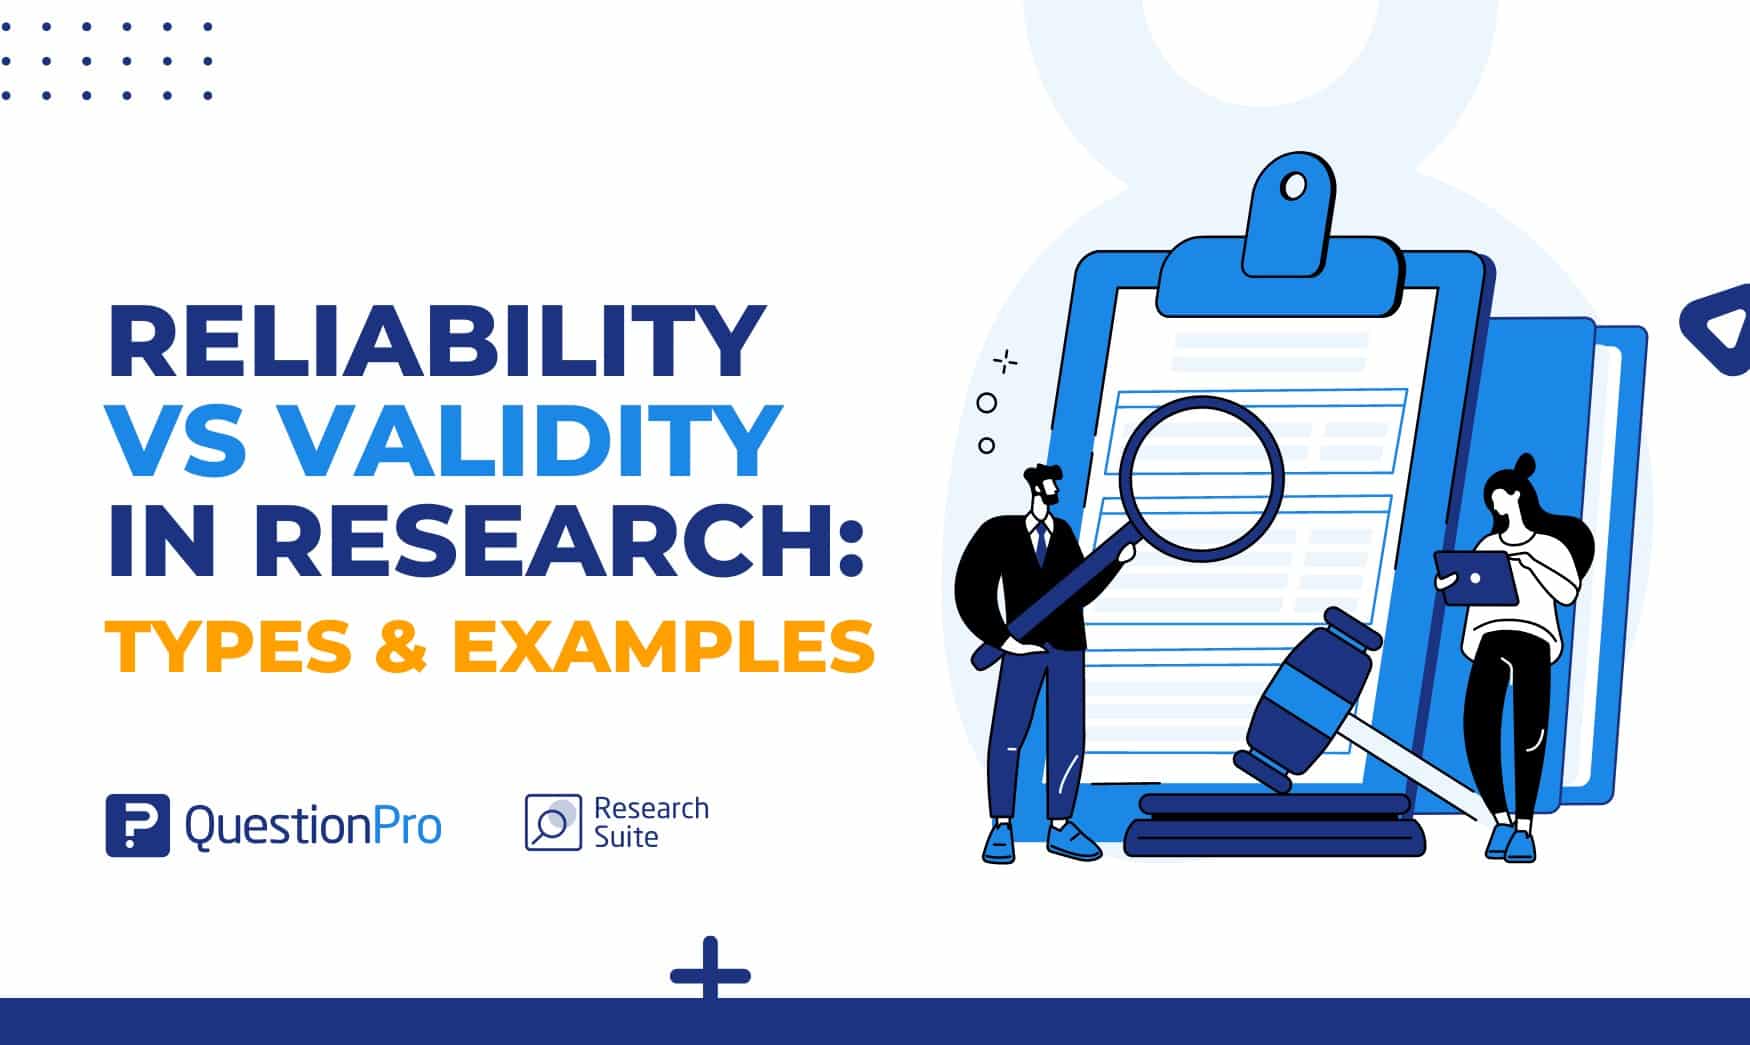 Explore how reliability vs validity in research determines quality. Learn the differences and types + examples. Get insights!